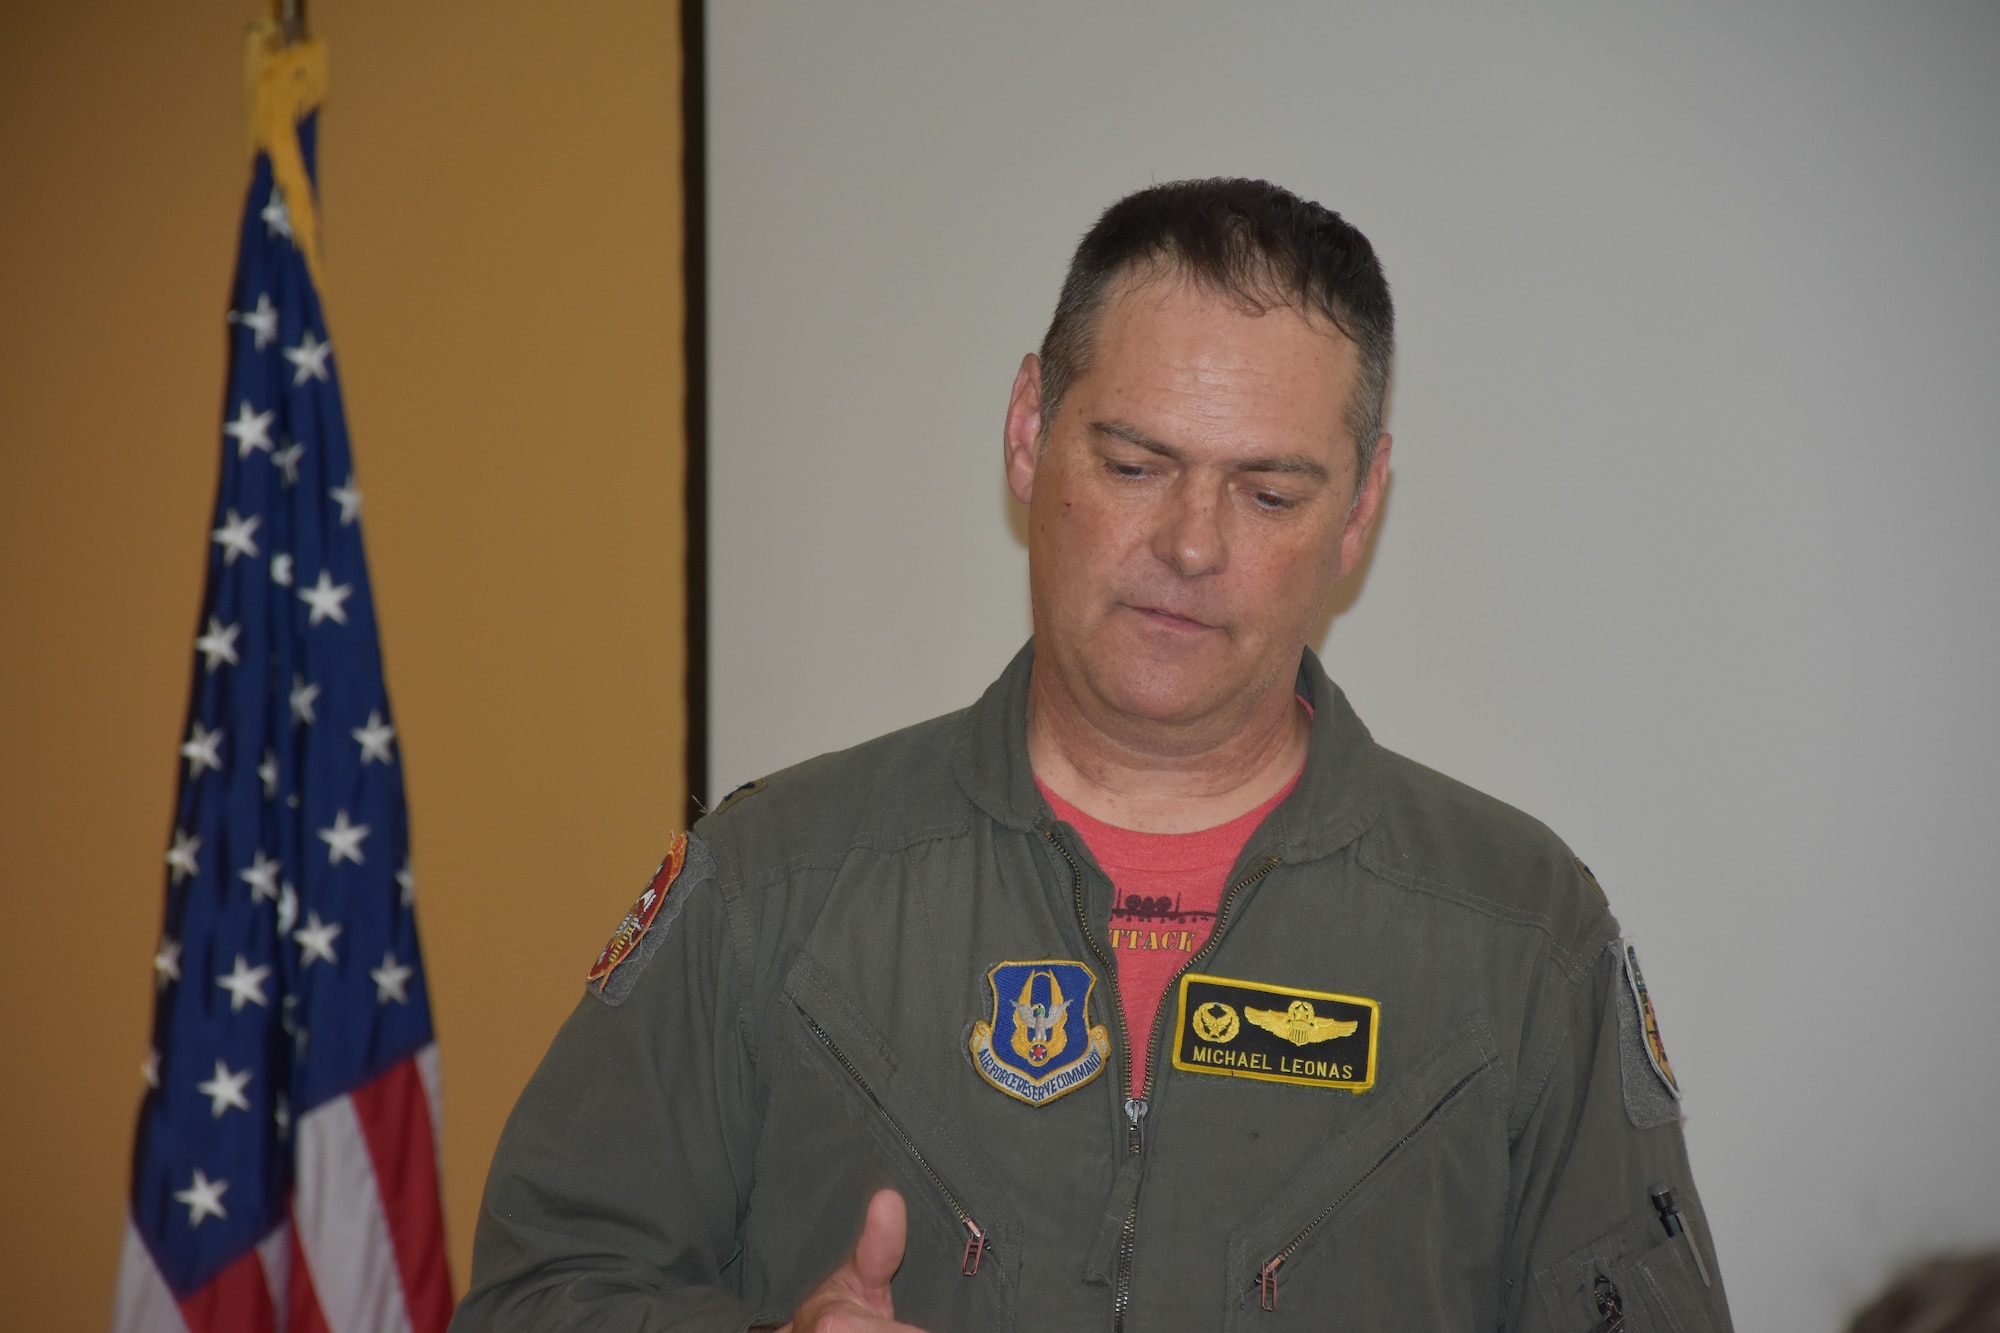 A man in a green flight suit with a red undershirt stands next to an American flag.